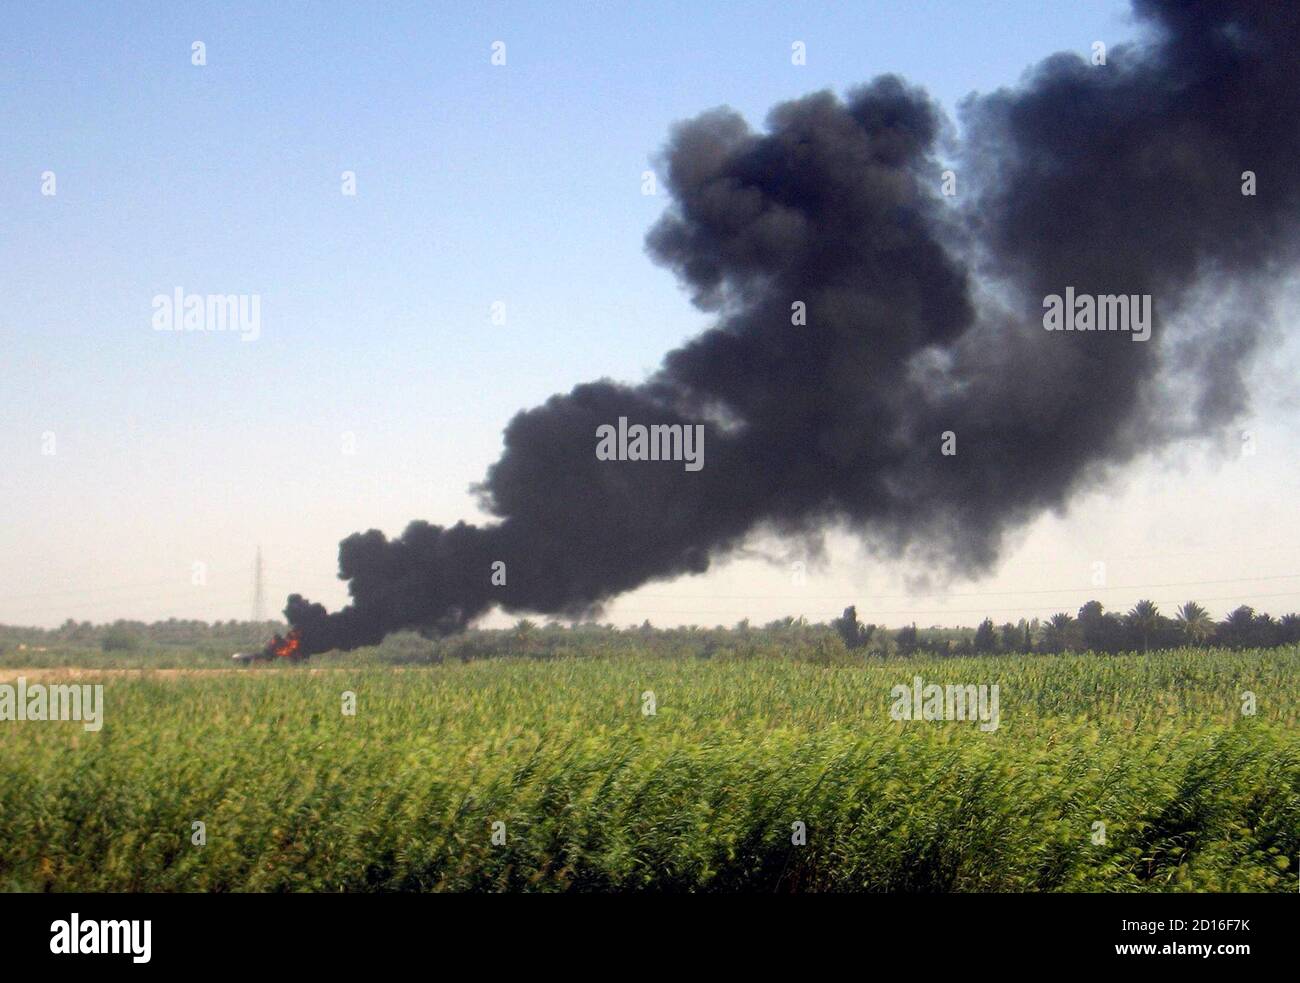 Black smoke rises from the scene of a roadside bomb attack targeting a convoy of oil tankers along a highway near Samarra, 96 km (60miles) north of Baghdad September 28, 2006.   REUTERS/Nuhad Hussin   (IRAQ) Stock Photo